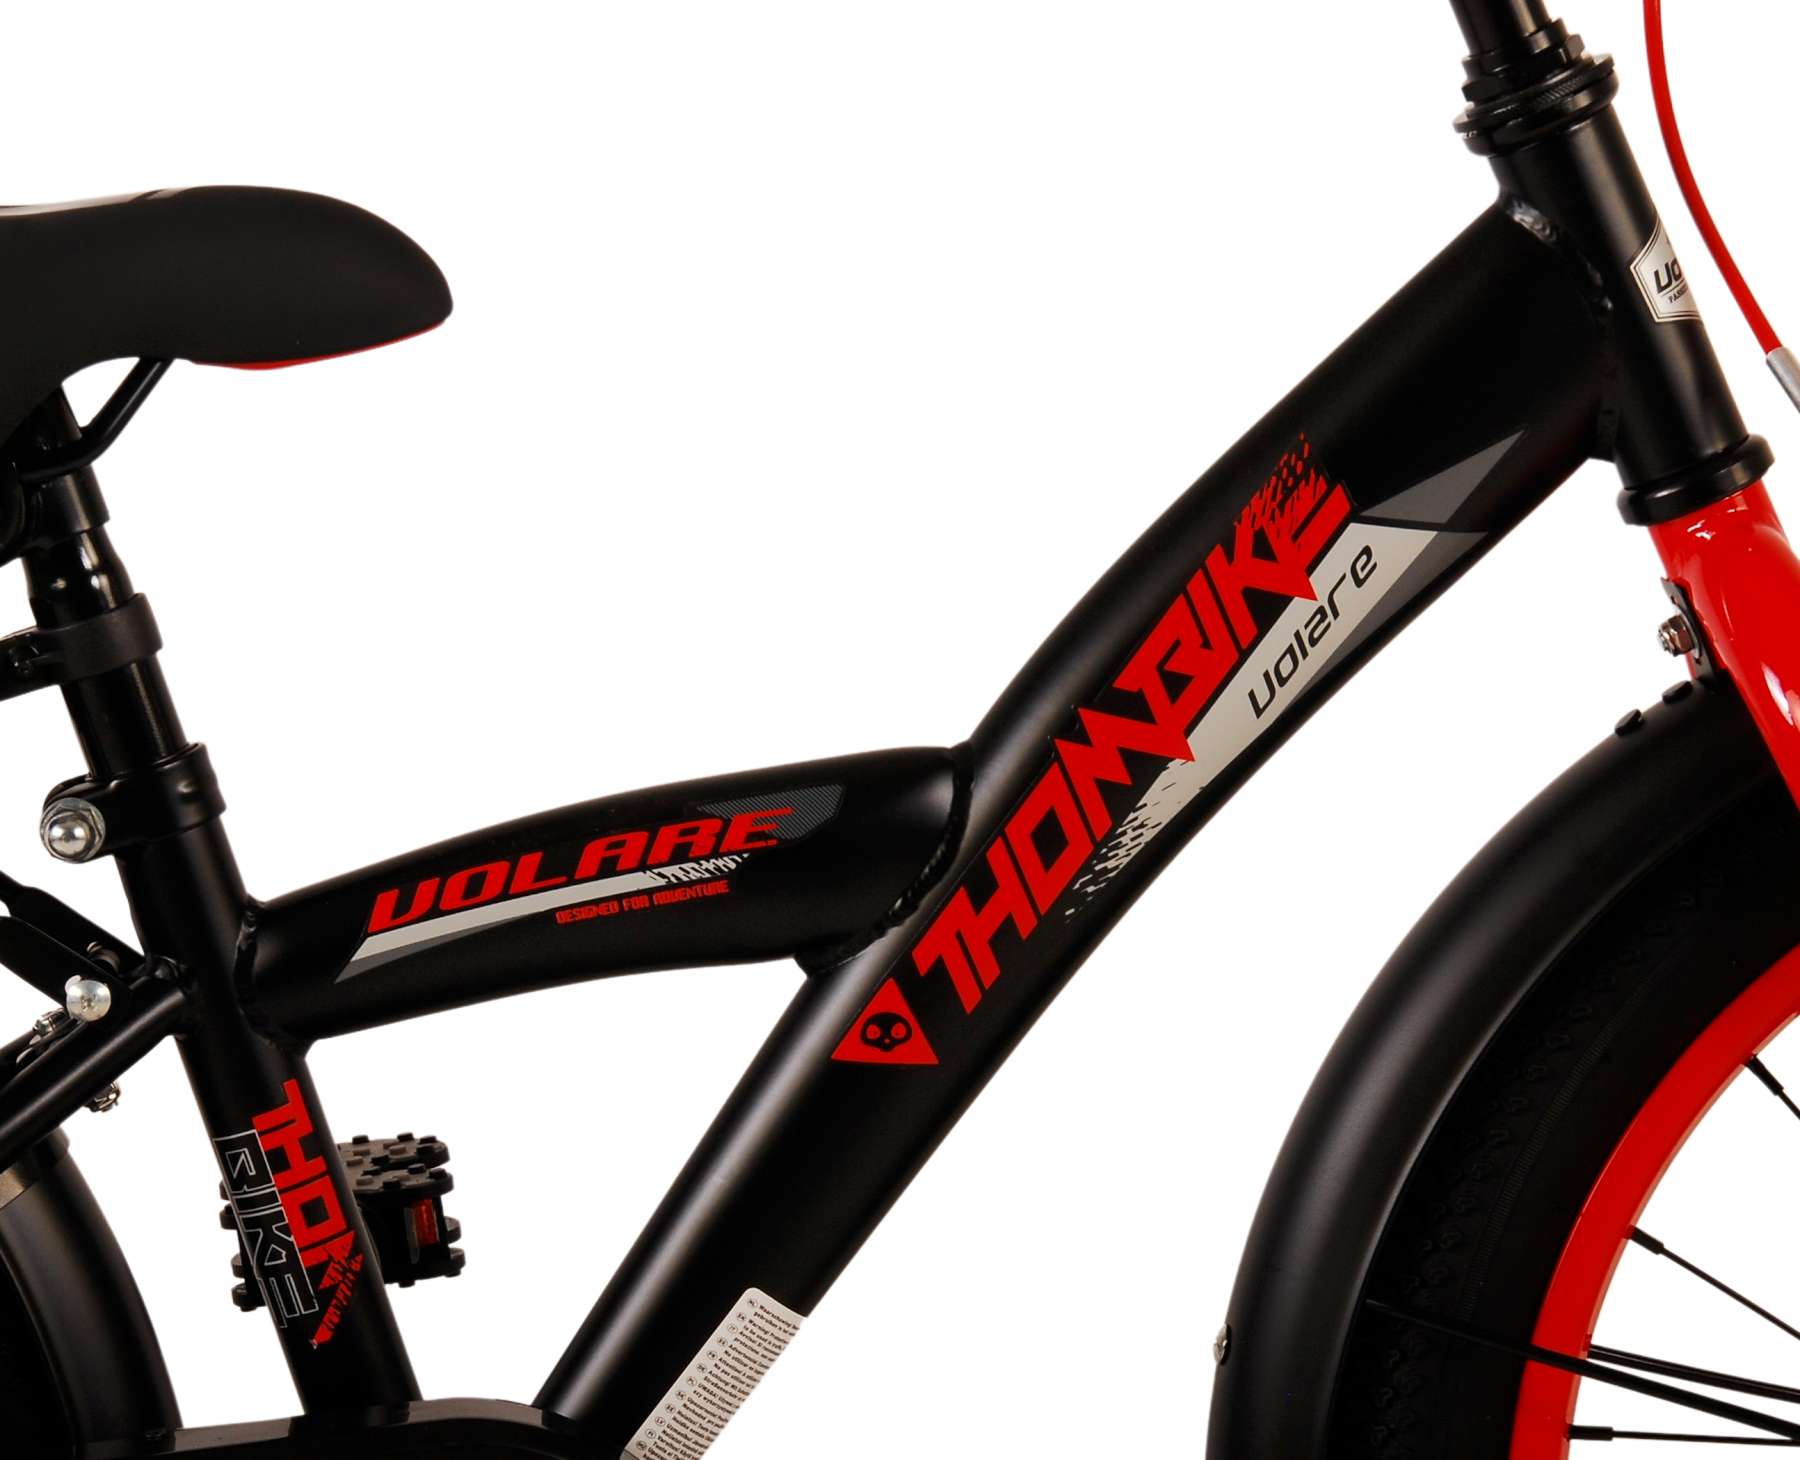 Thombike_18_Inch_Rood_-_6-W1800